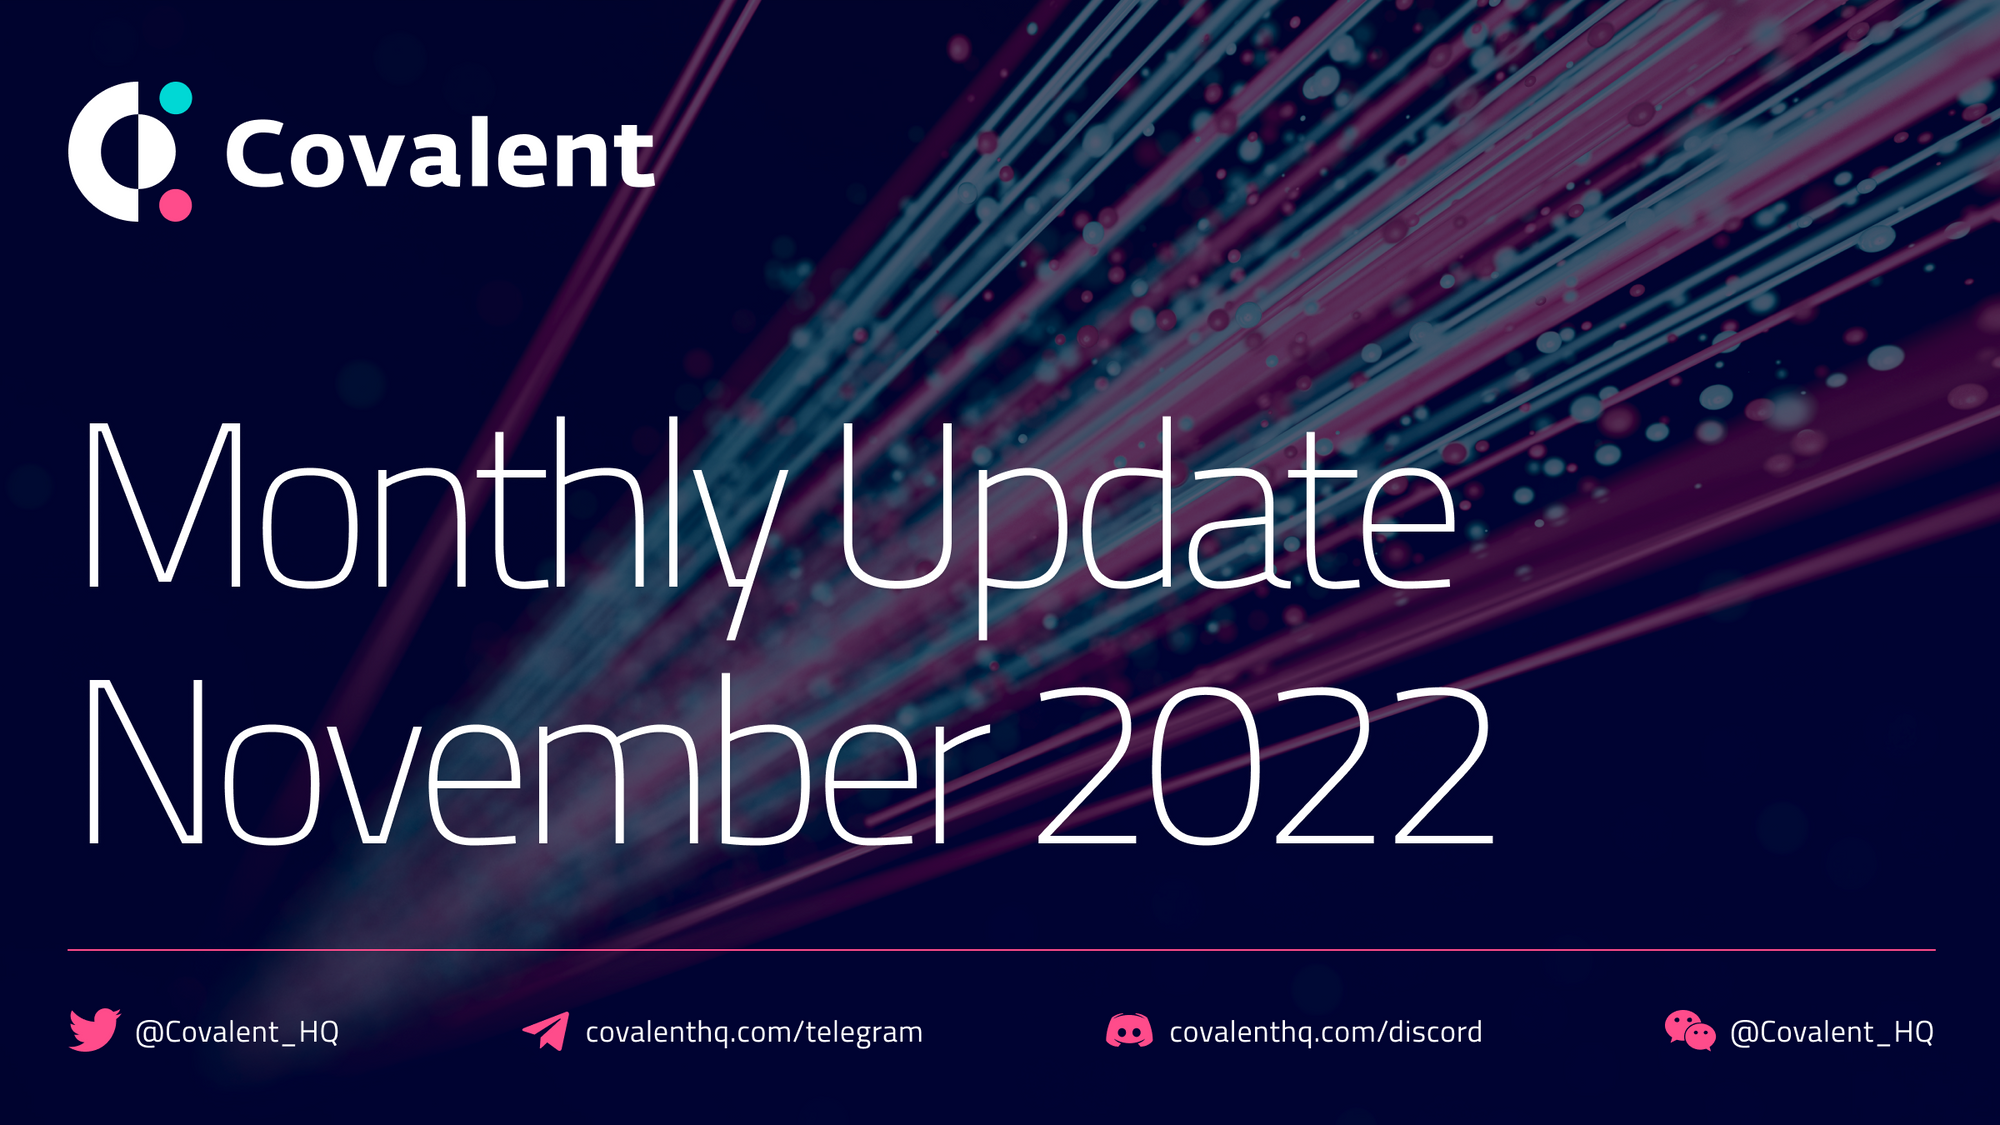 November 2022: Covalent Vision 2023 and Trailblazing New Web3 Frontiers with zkEVM roll up; Scroll. 🔥